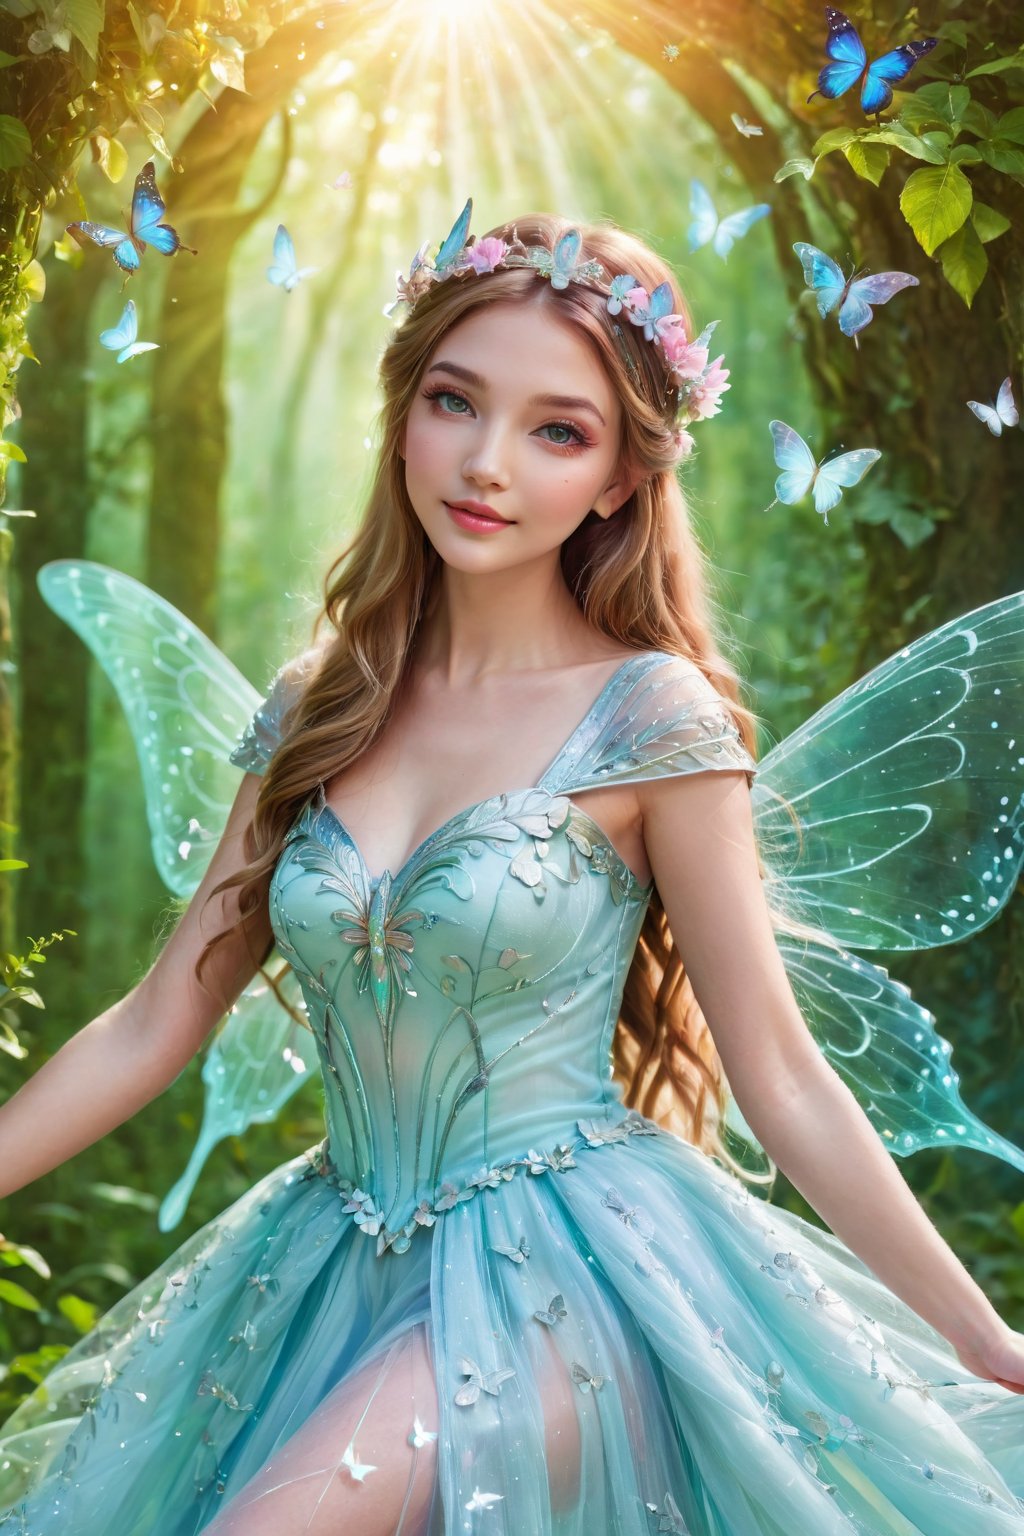 fantasy, girl, magical, ethereal, enchanted, mystical, dreamy, ethereal creature, beautiful detailed eyes, beautiful detailed lips, flowing hair, glowing skin, long eyelashes, enchanted forest, shimmering light, soft colors, whimsical, graceful, delicate, fairy-like, sparkling dress, floating, surrounded by butterflies, surrounded by flowers, holding a magical wand, dreamy atmosphere, fantasy world, glowing wings, surreal, otherworldly, mystical aura, captivating gaze, ethereal beauty, enchanting smile, magical crown, in a magical pose, magical creatures, mysterious, enchanting, captivating, surreal landscape, fairy tale, enchanted castle